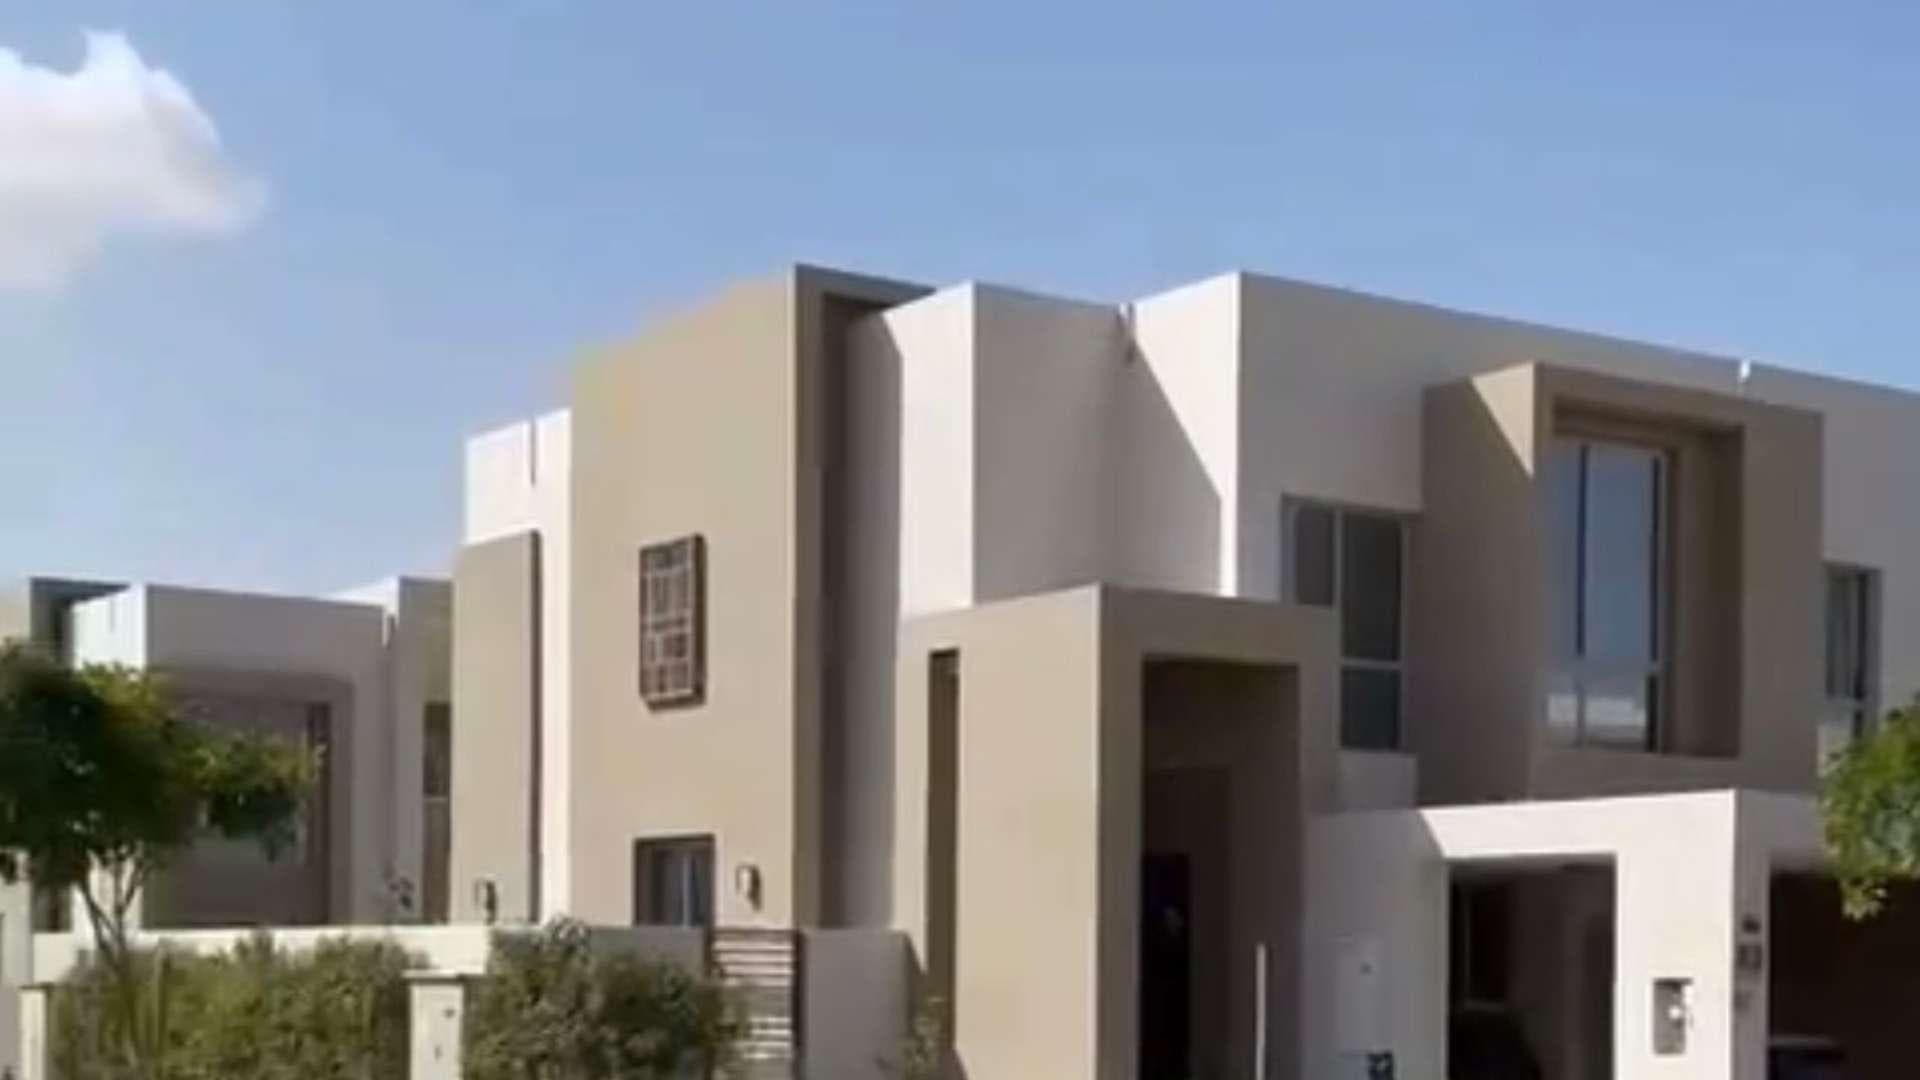 3 Bedroom Townhouse For Rent Reem Community Lp36020 18aaed8aa0a81e00.jpg